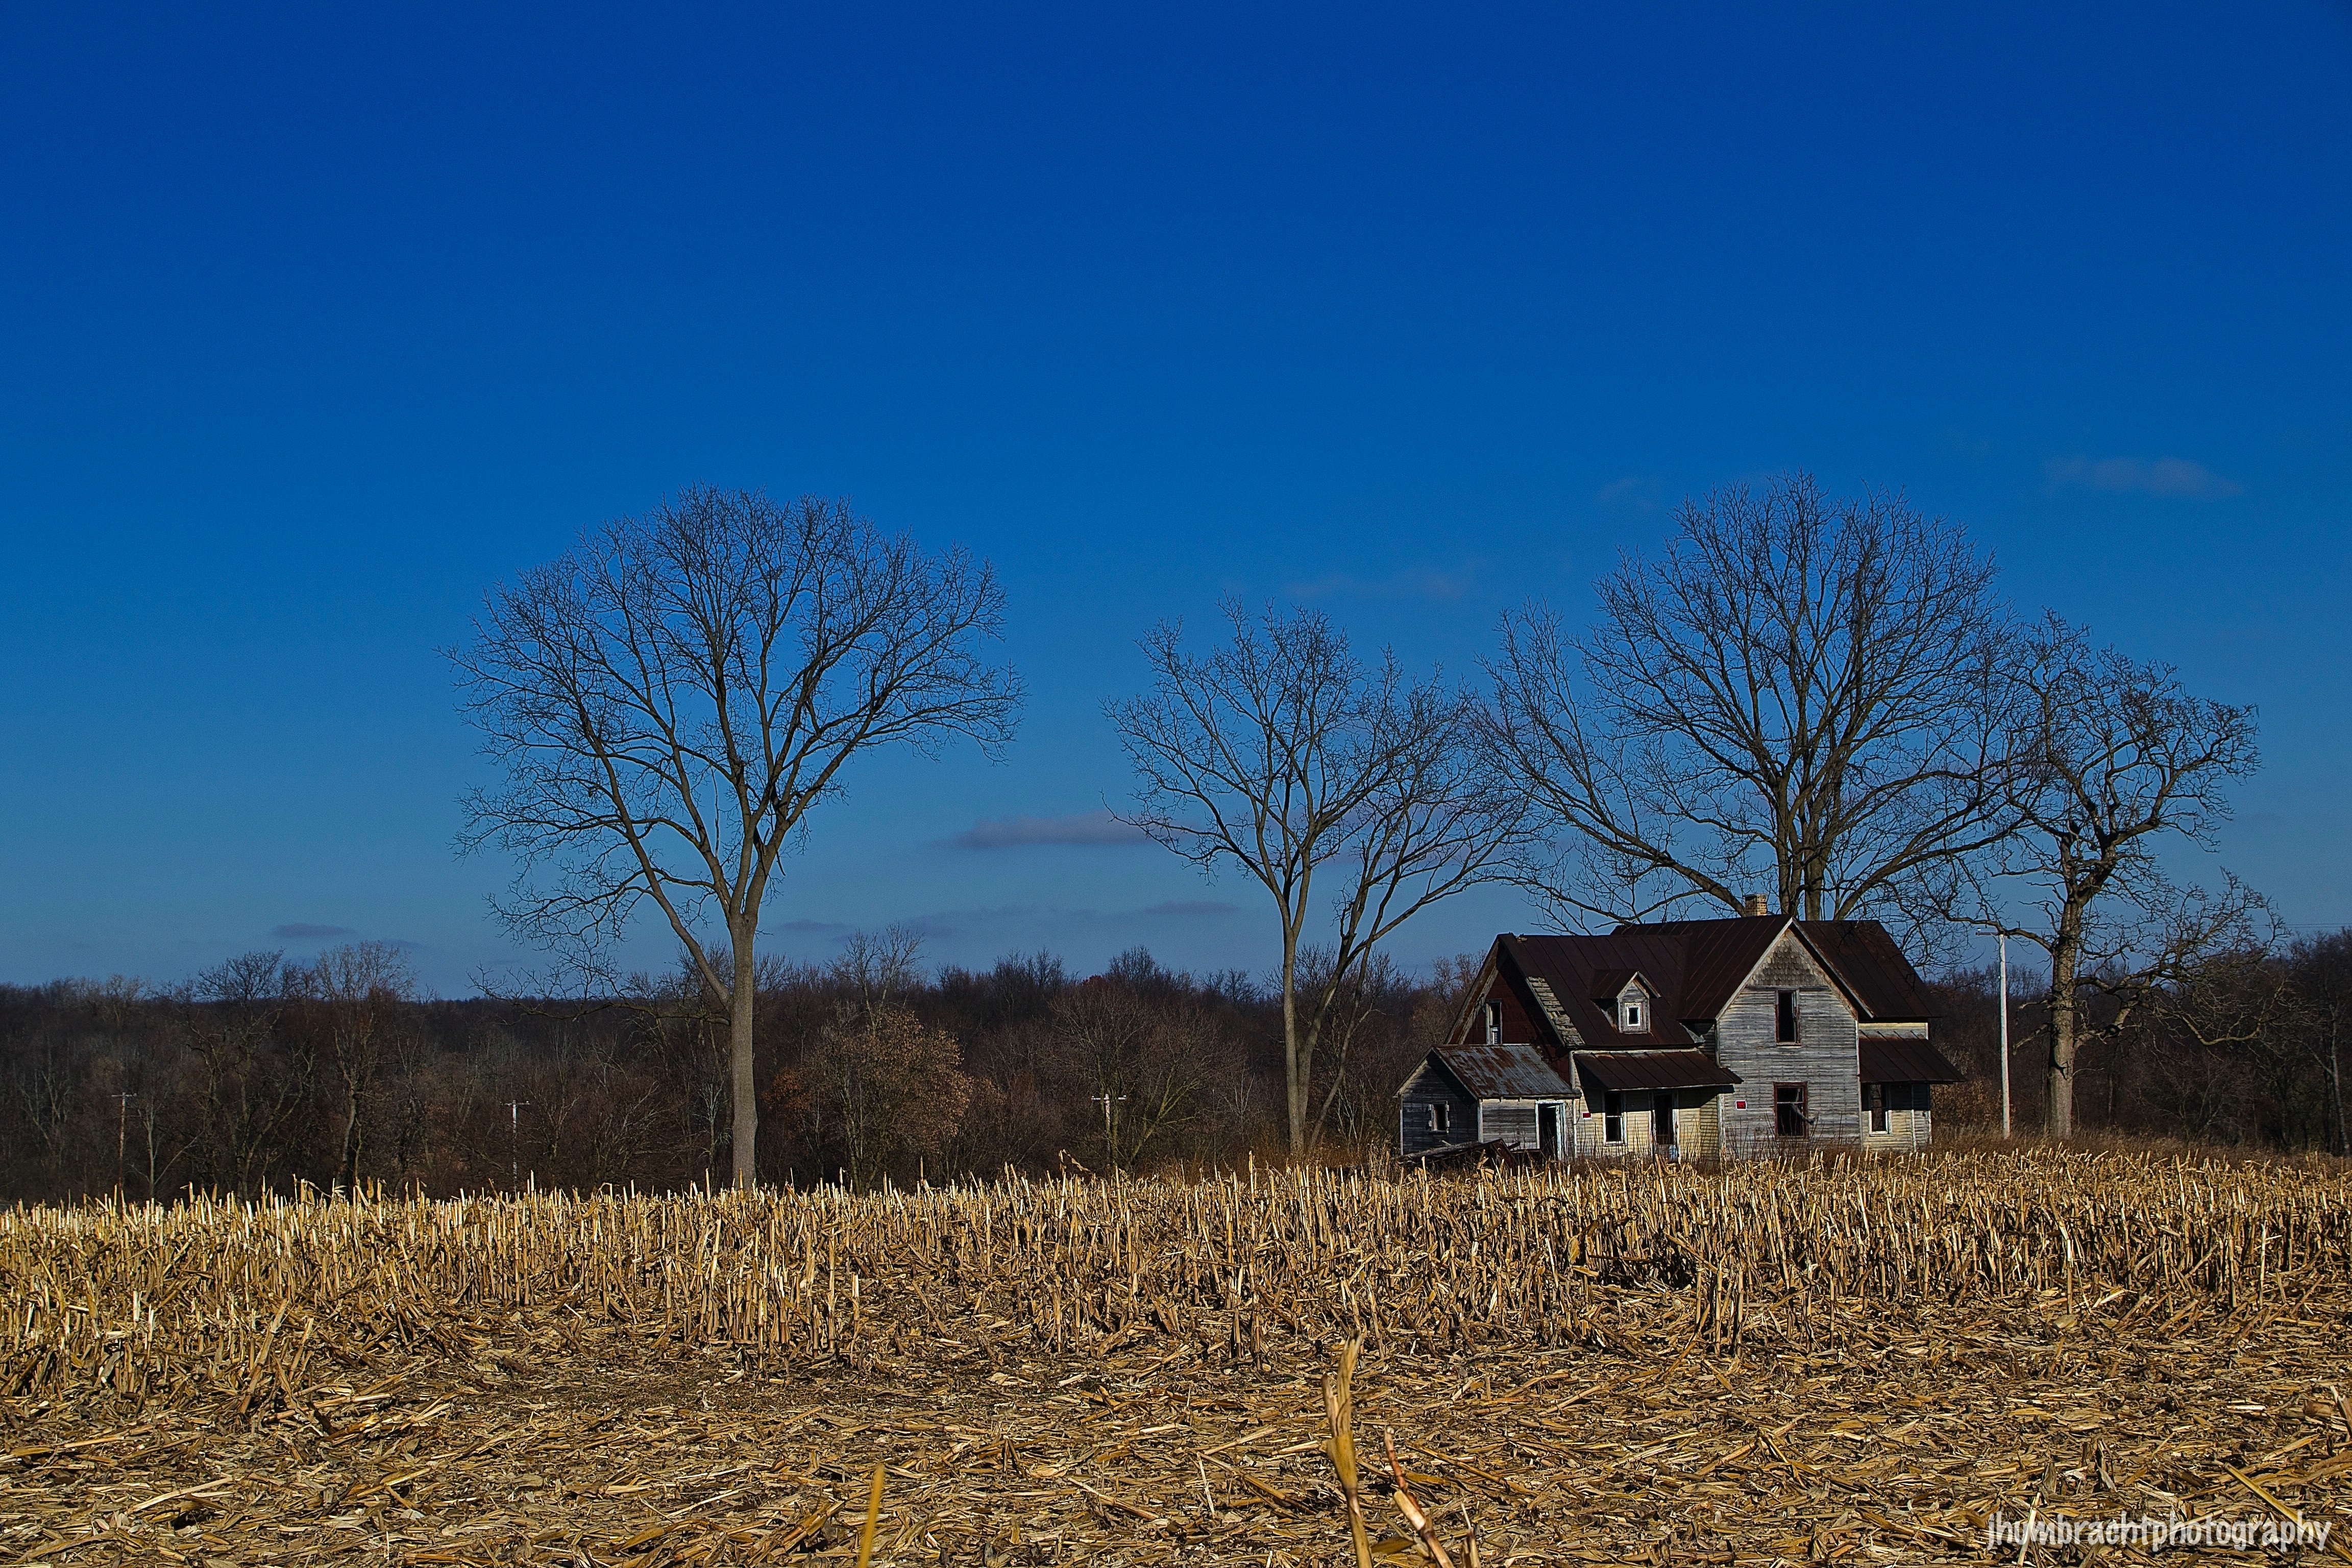 Farmhouse | Michigan Countryside | Image By Indiana Architectural Photographer Jason Humbracht